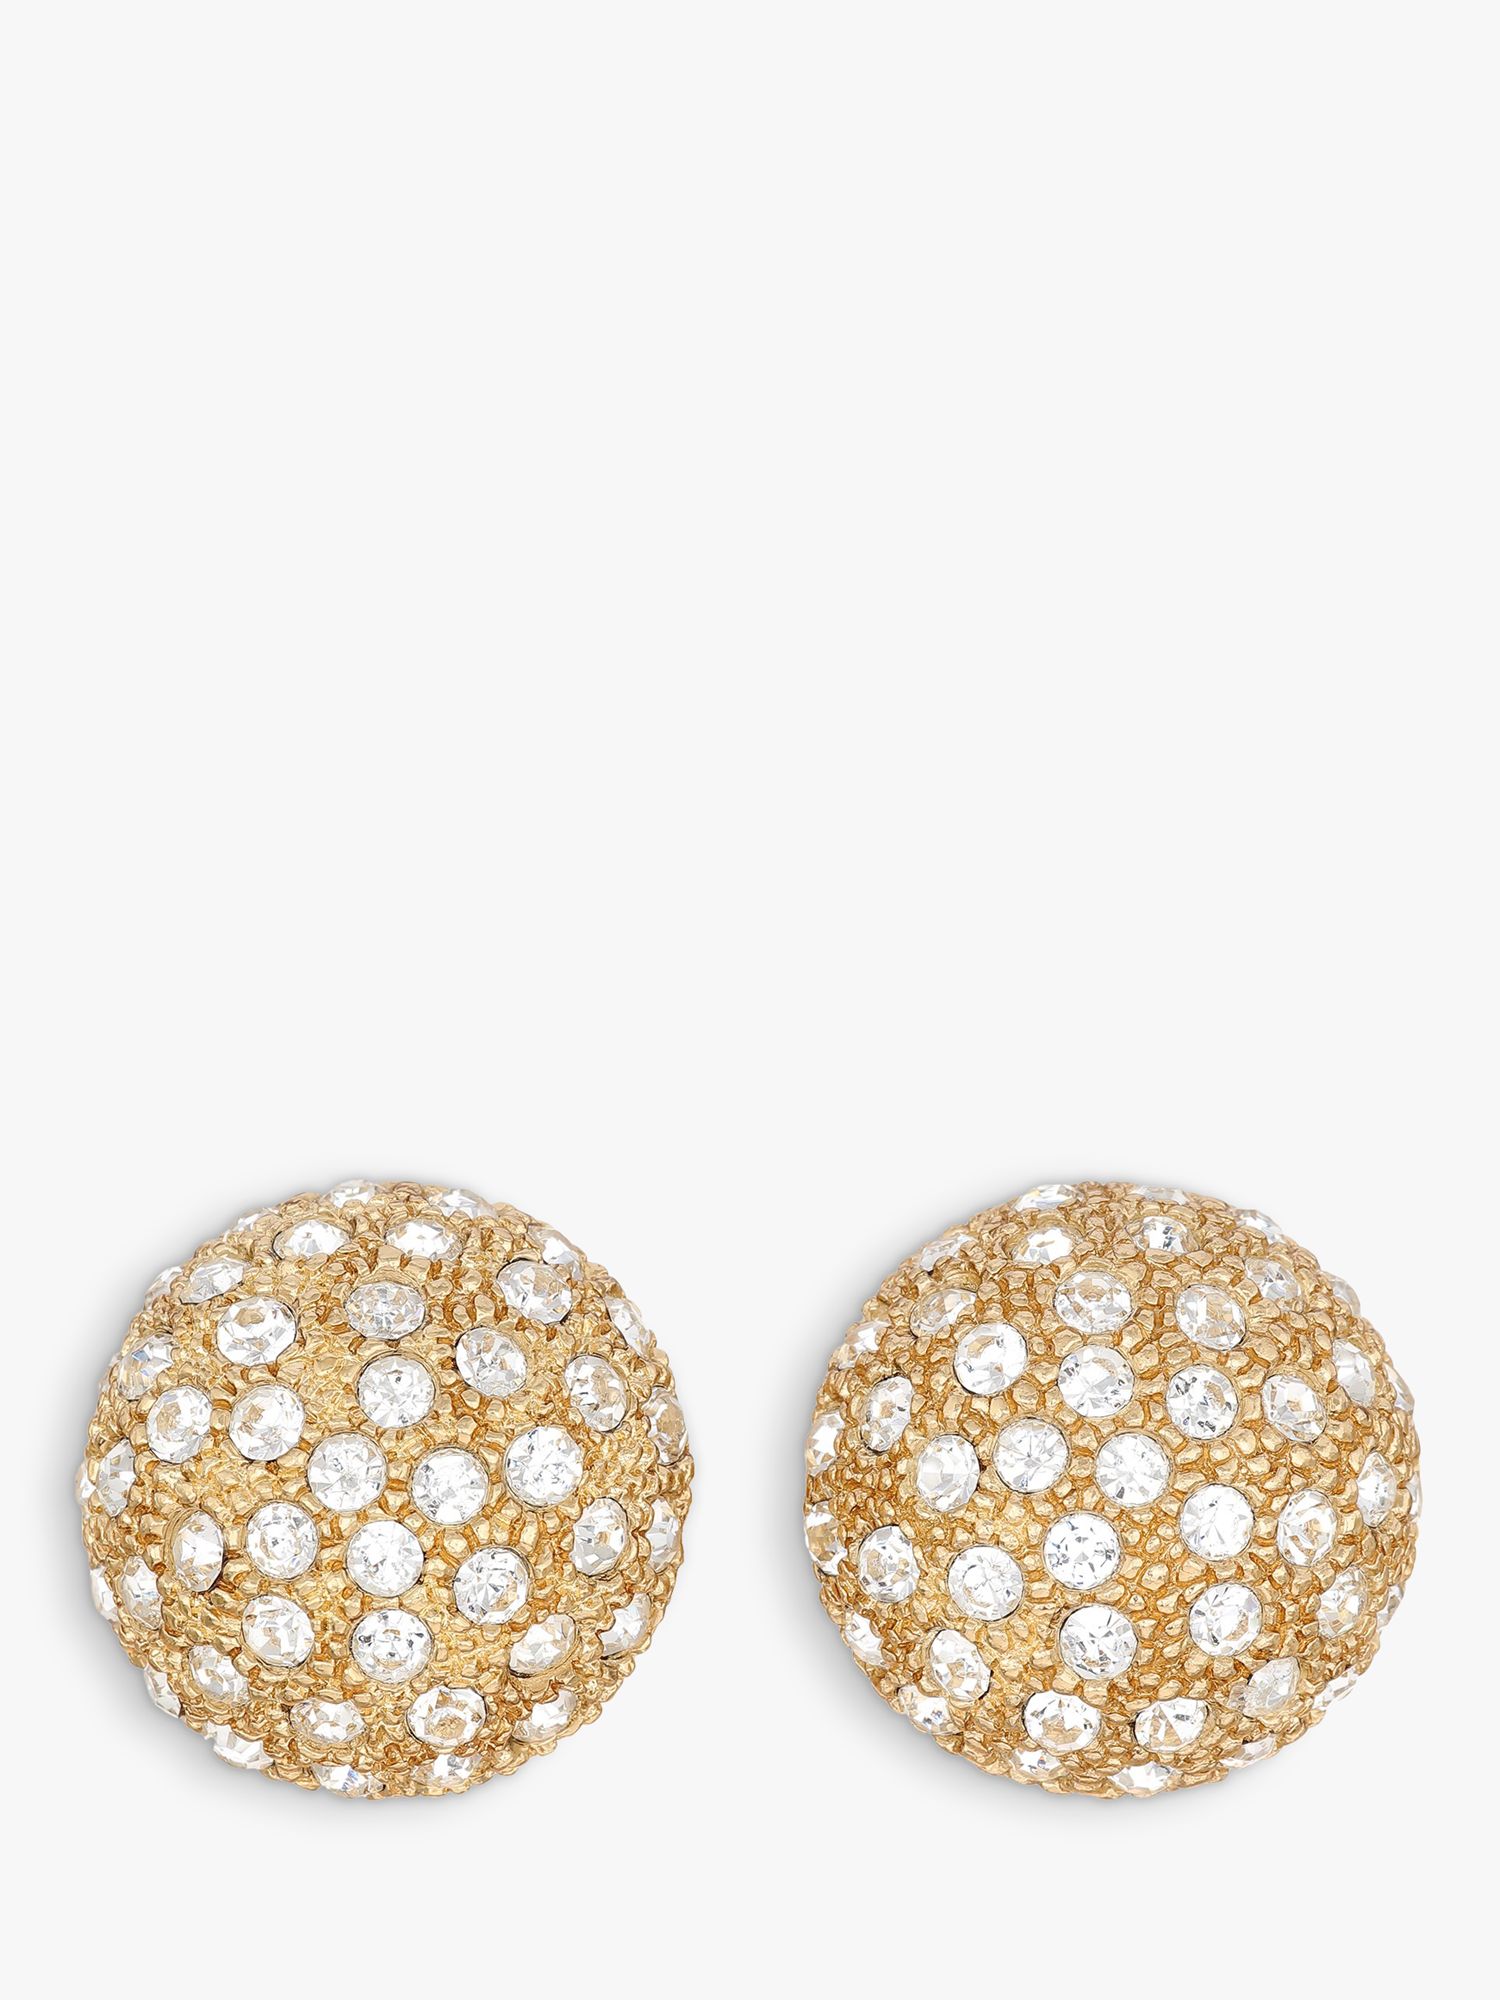 Eclectica Vintage Dome Swarovski Crystal Clip-On Earrings, Dated Circa ...